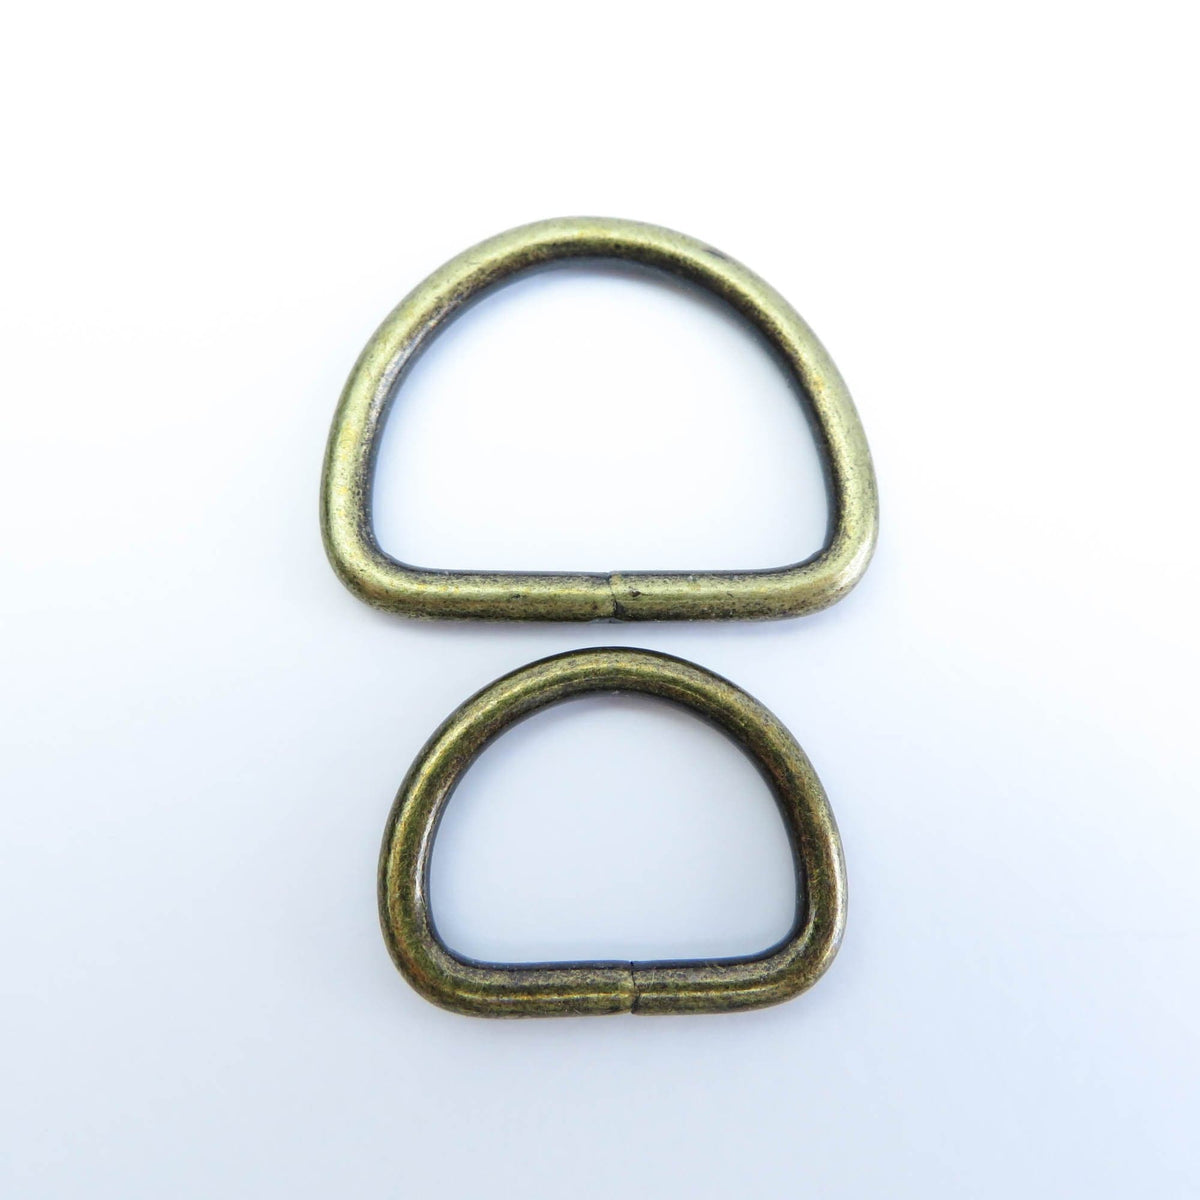 D Rings.20,25 mm welded rings. Best used for haberdashery, leathercraft, saddlery, bag sewing